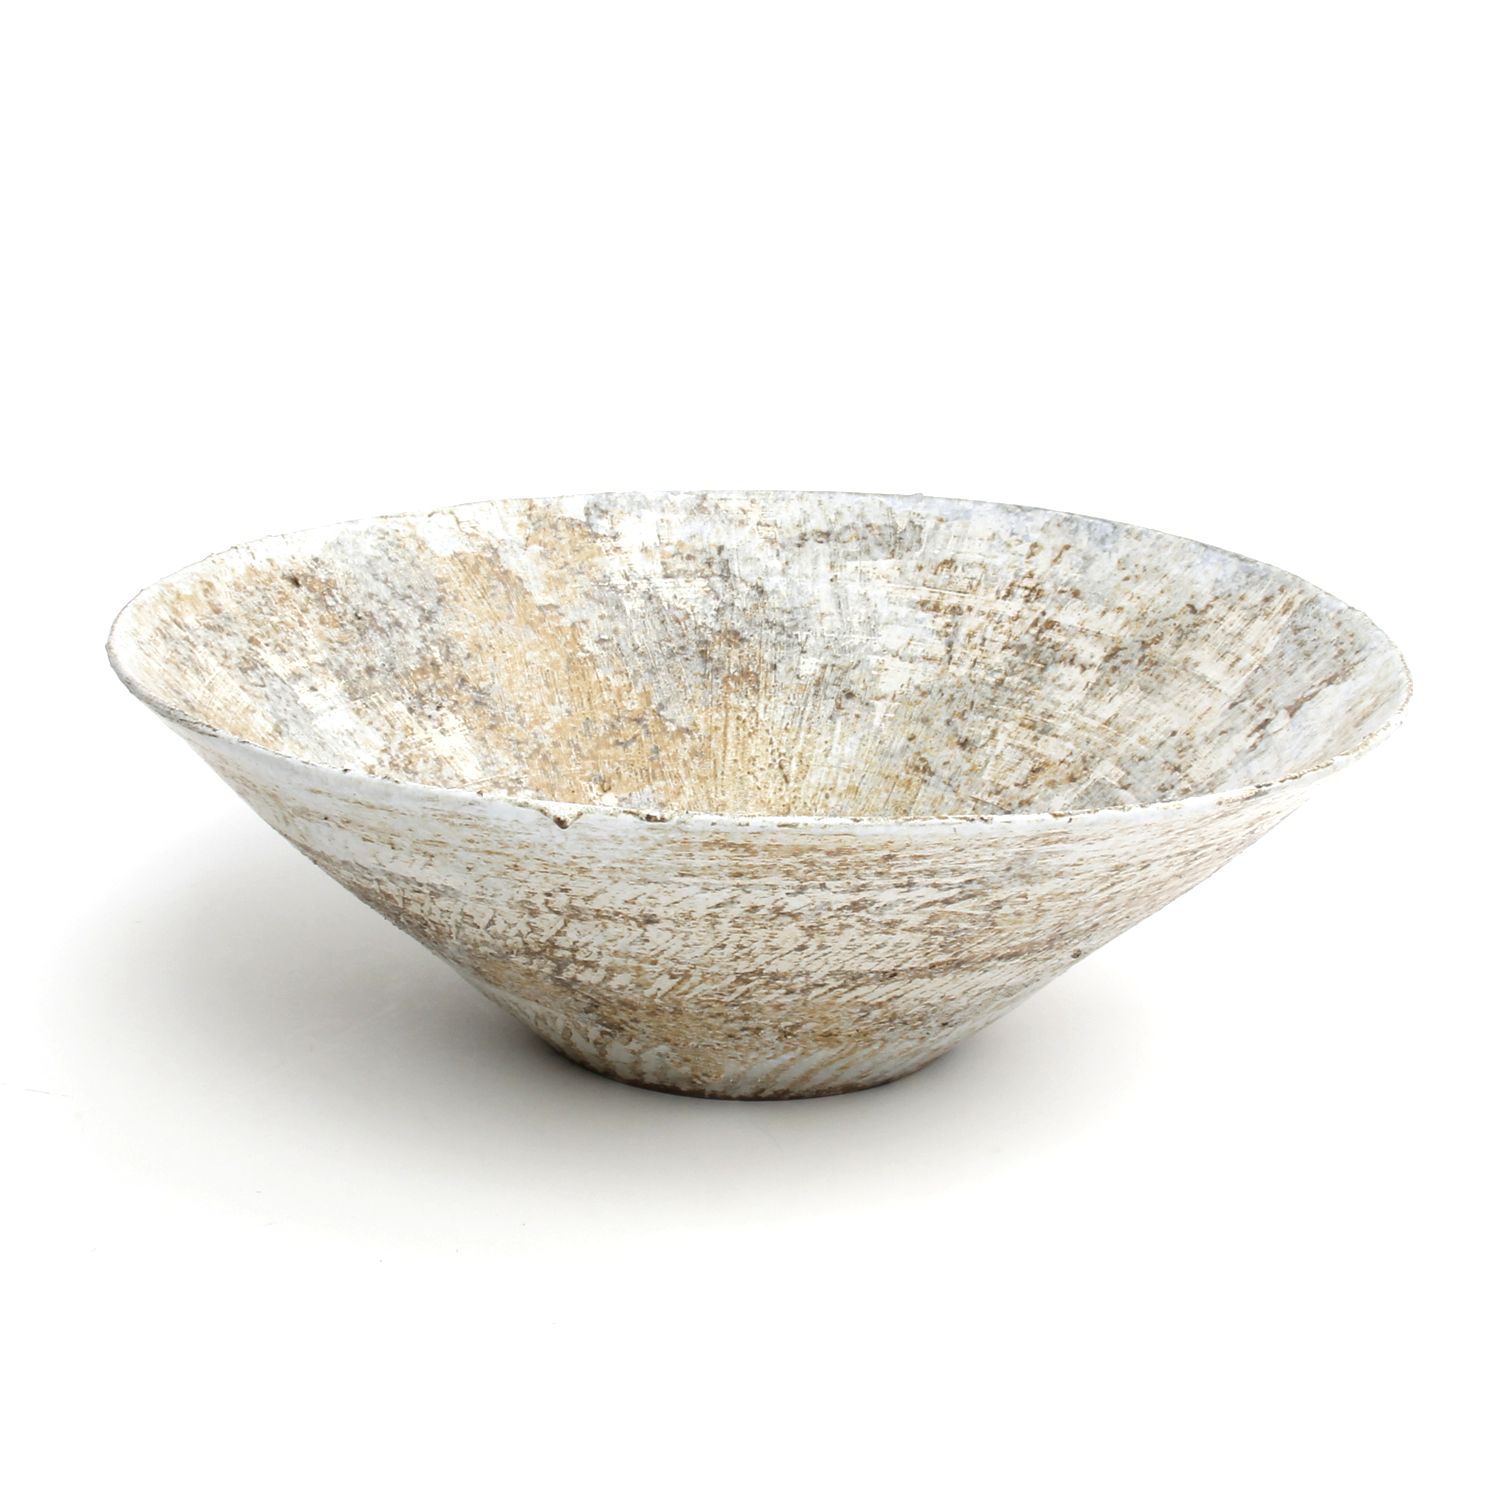 Makiko Hicher: Large Wide Bowl Product Image 2 of 2